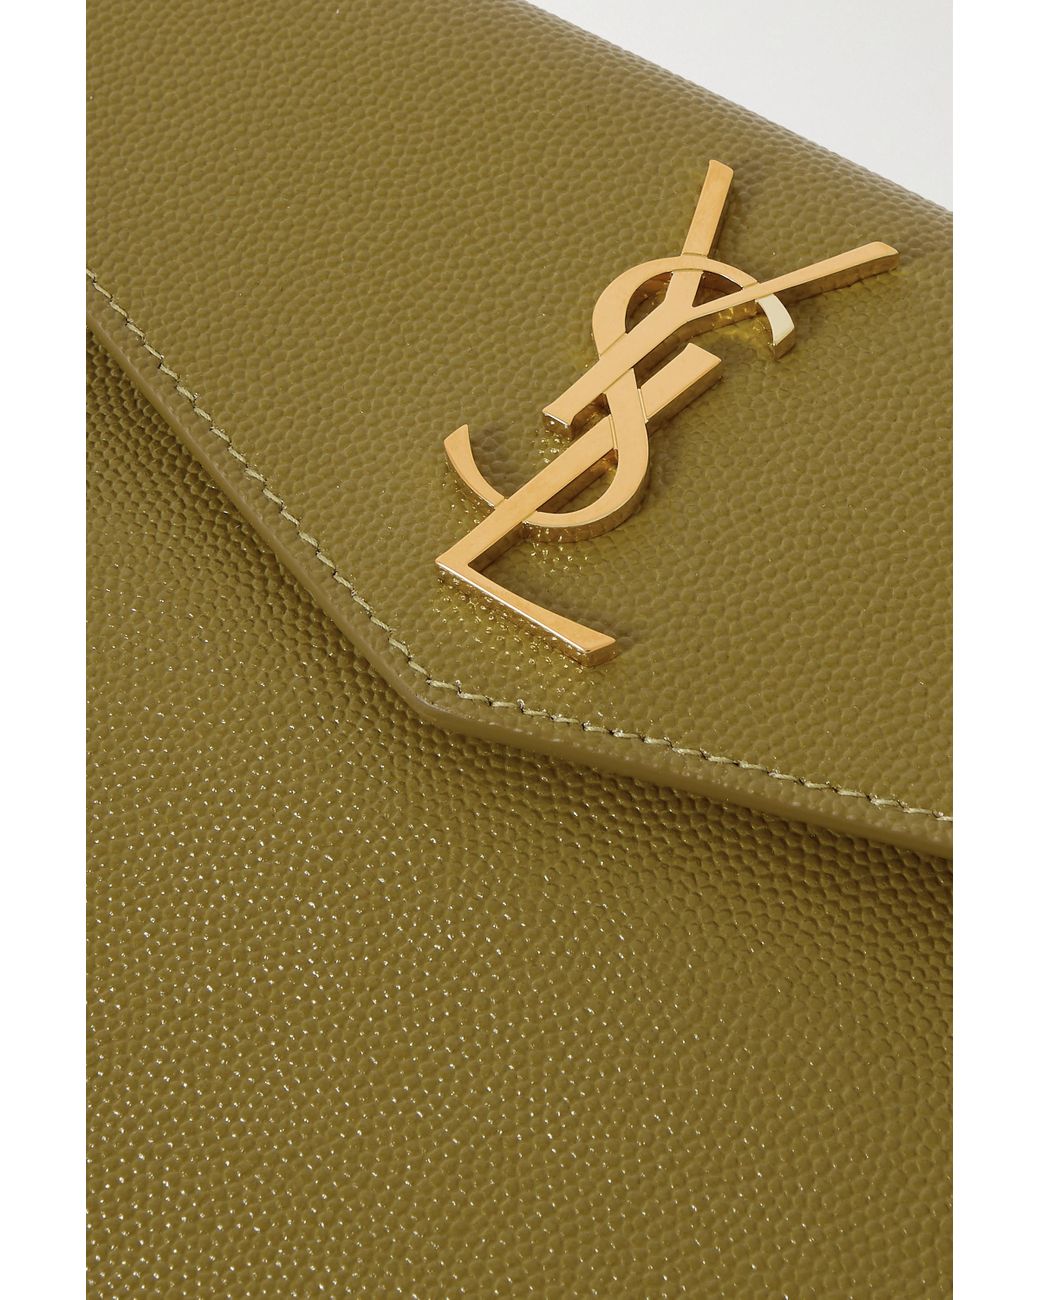 Saint Laurent Uptown Baby Textured-leather Pouch in Green